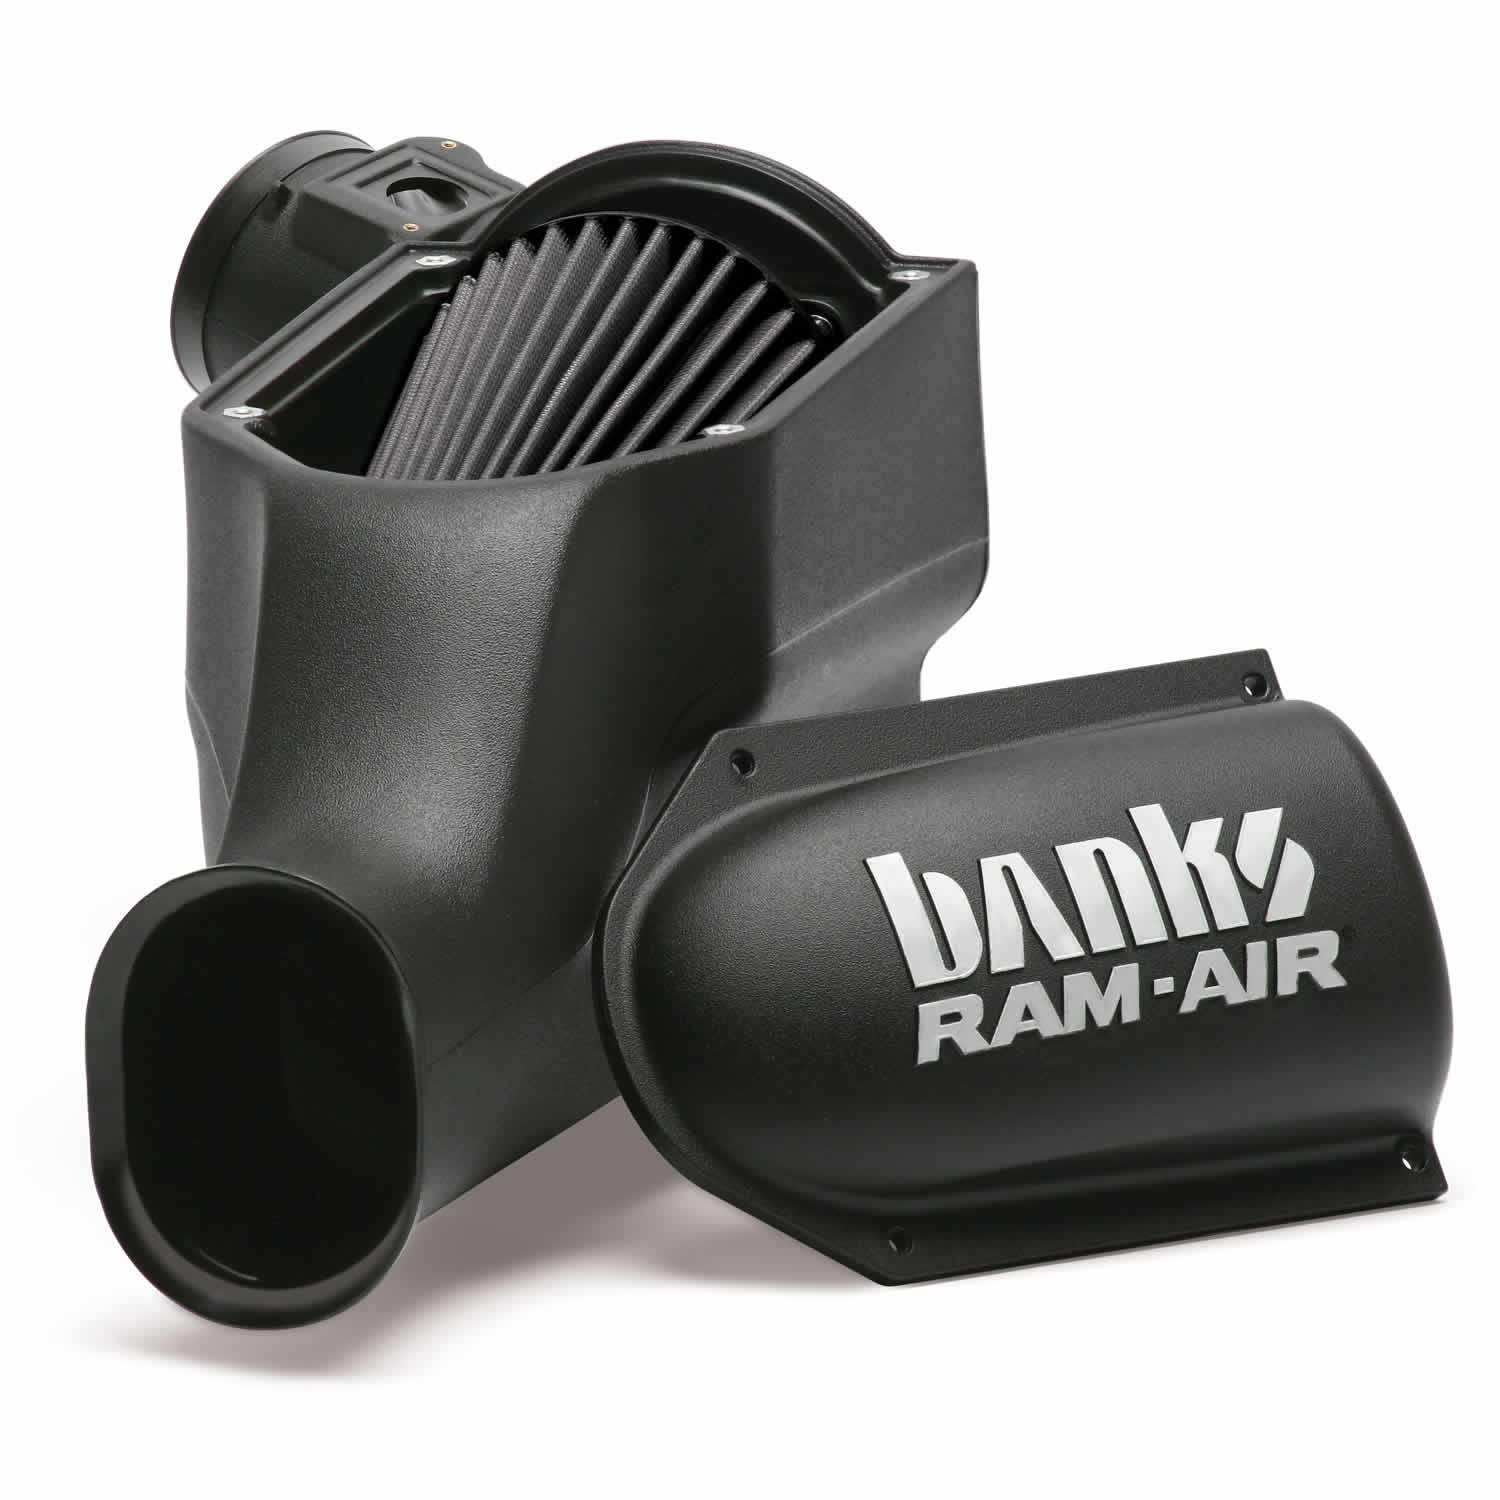 Lid open on the Banks Ram-Air intake for 2003-2007 Ford F250/F350 6.0L Power Stroke 42155-D